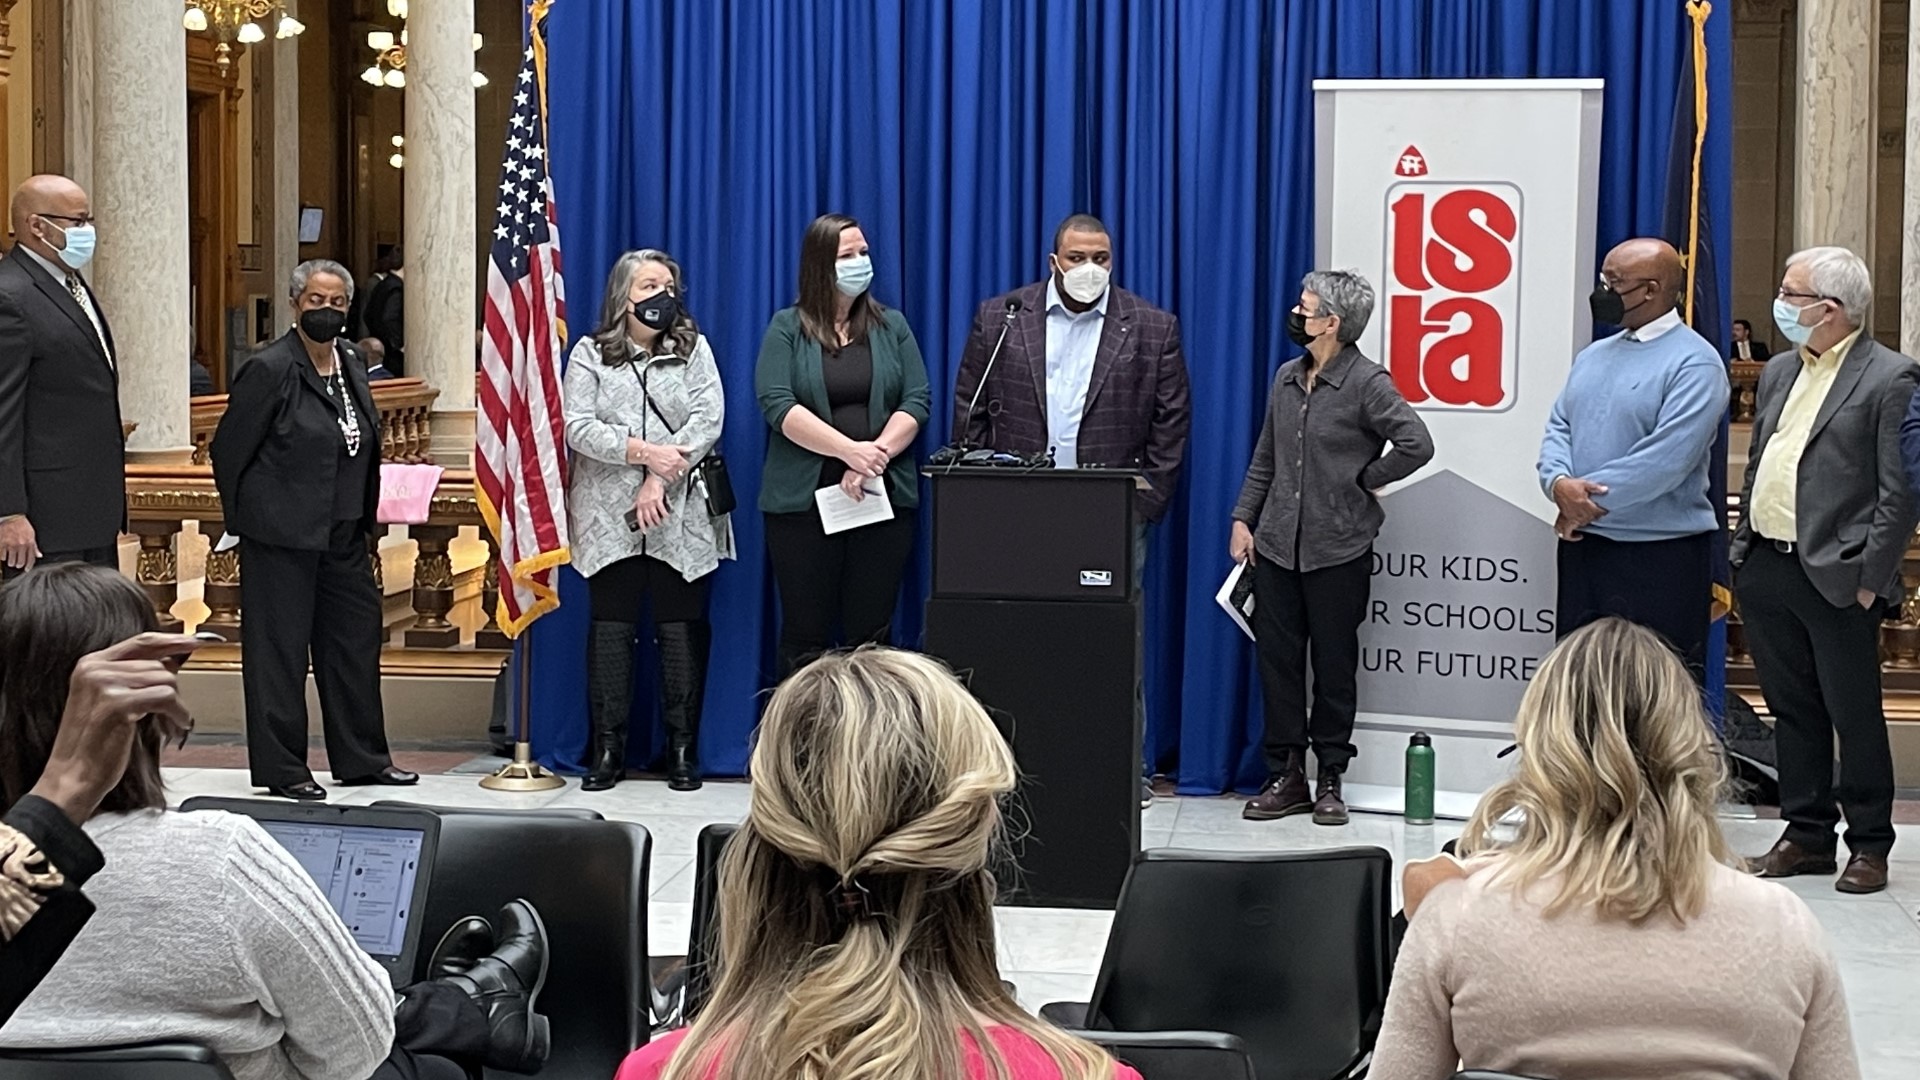 A controversial school bill was called "dangerous" and "racist" during a press conference by the state’s largest teachers union Wednesday.